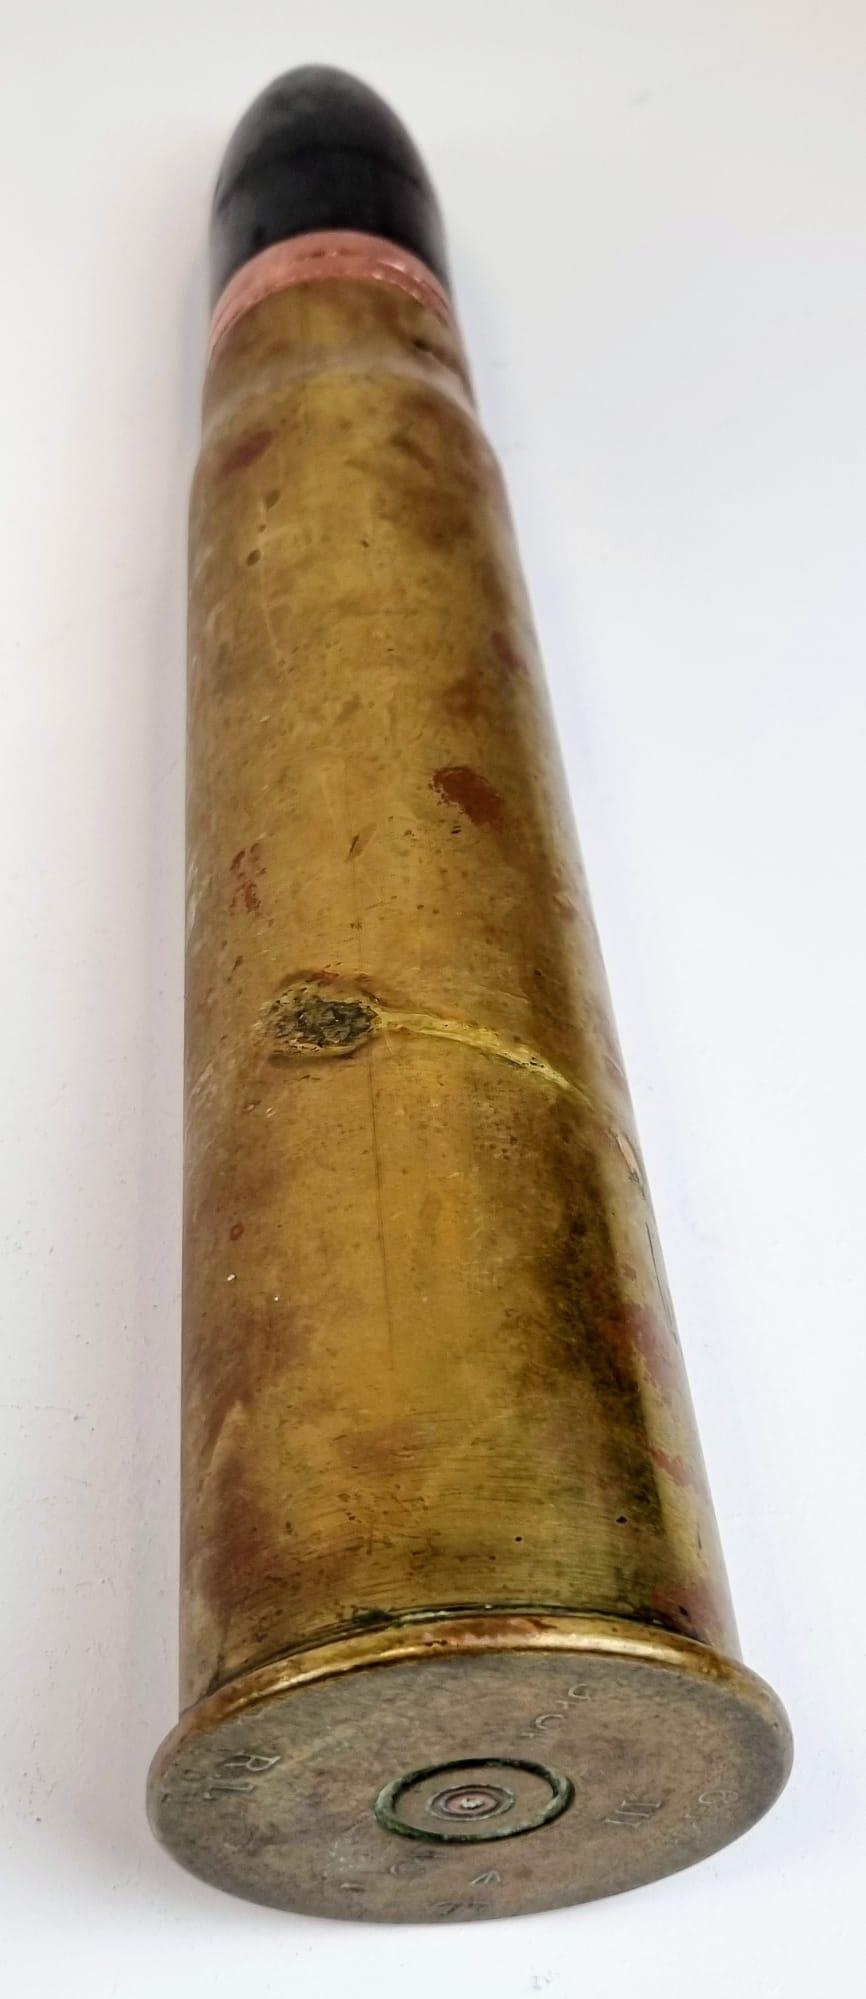 WW1 British MK1 Tank 6 Pounder Shell Case Dated 1916 (Battle of the Somme). - Image 5 of 5